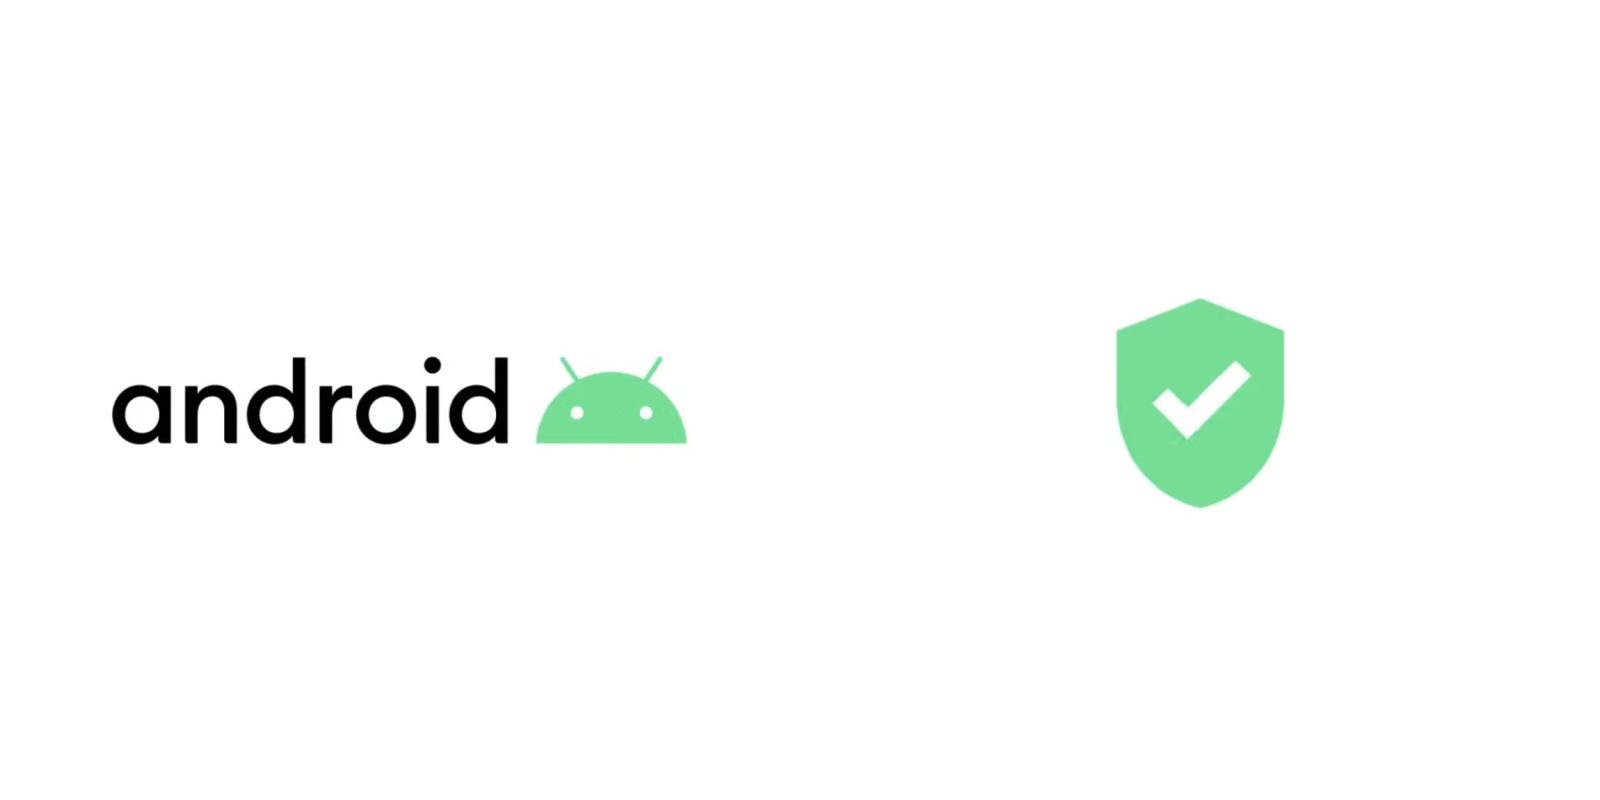 Protected by Android